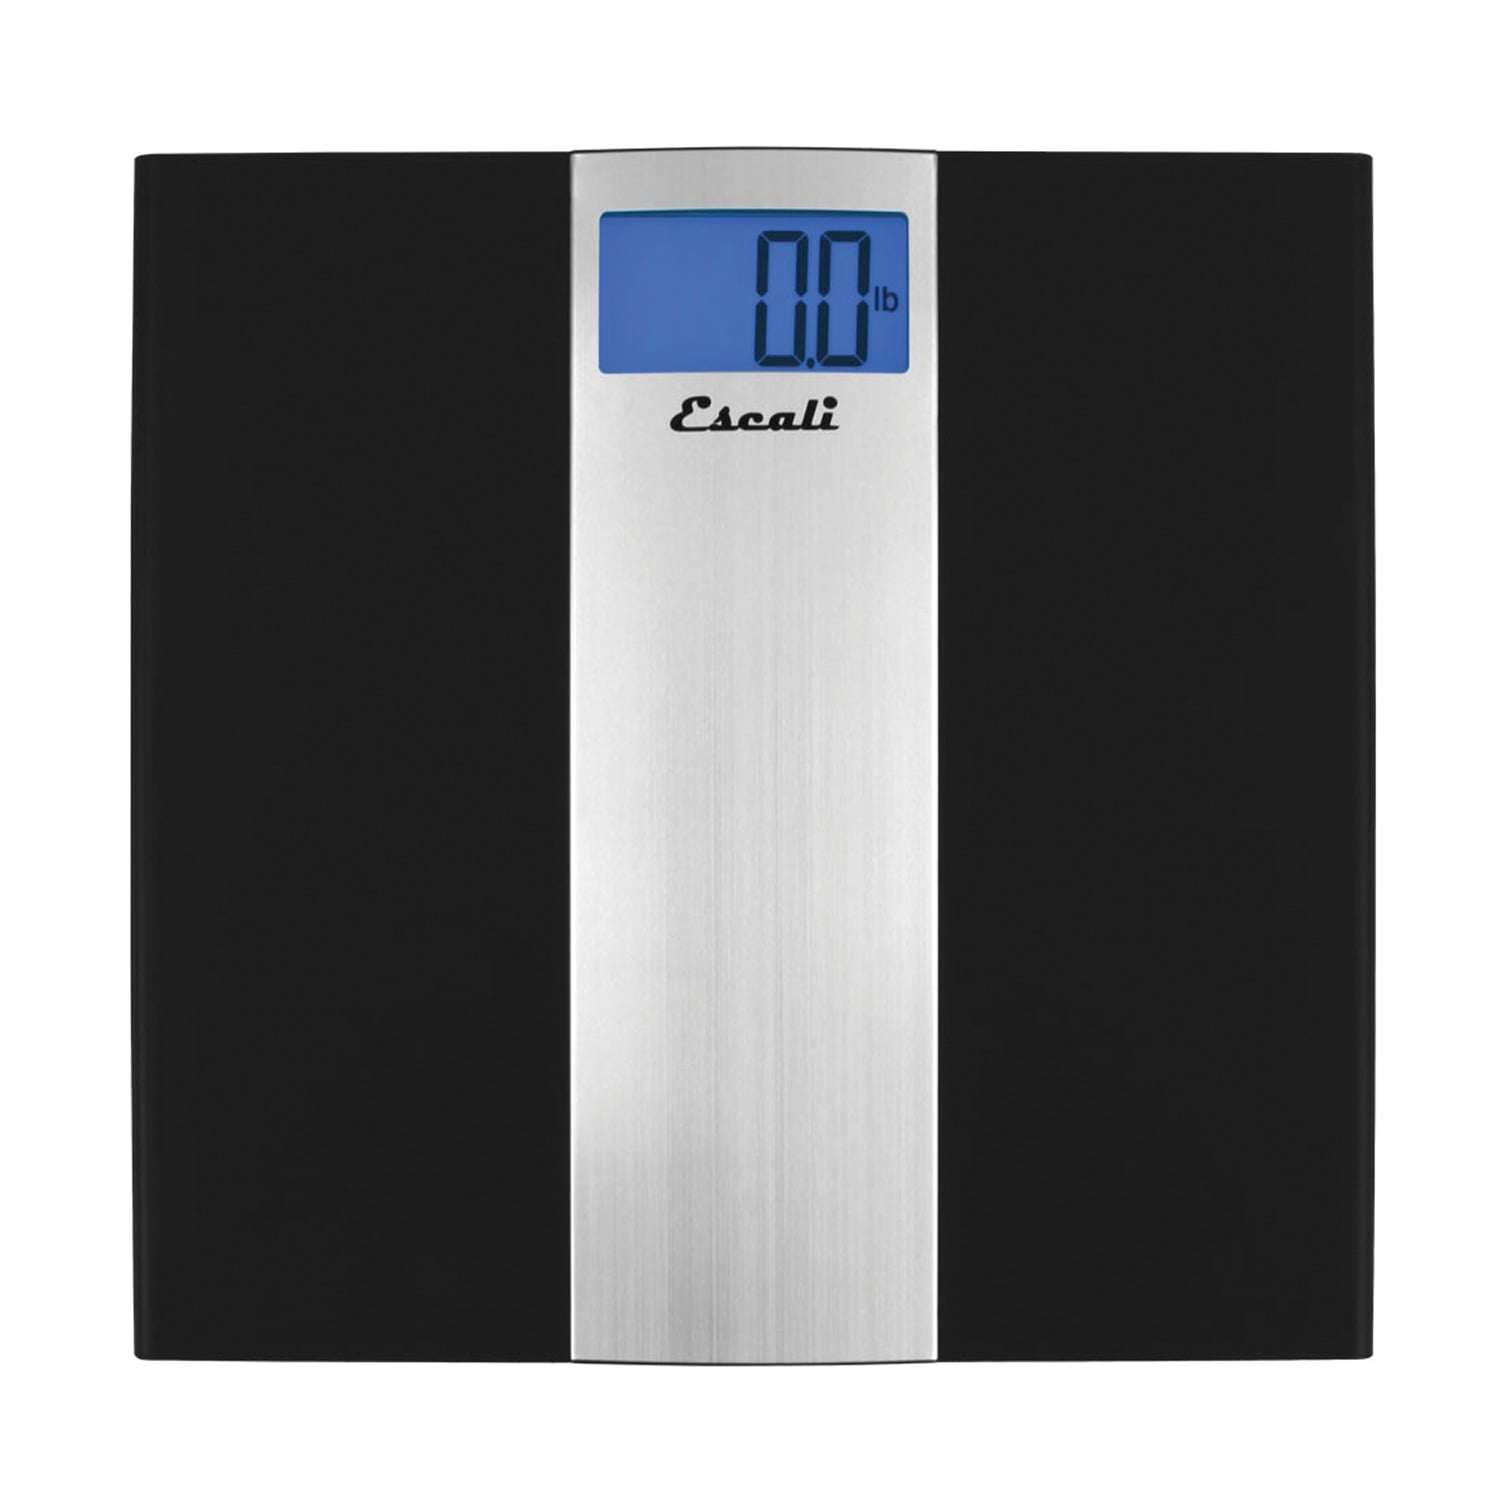  Escali ComfortStep Anti-Slip Digital Bathroom Scale for Body  Weight with Removable Linen Platform Cover and High Capacity of 400 lb,  Batteries Included : Health & Household